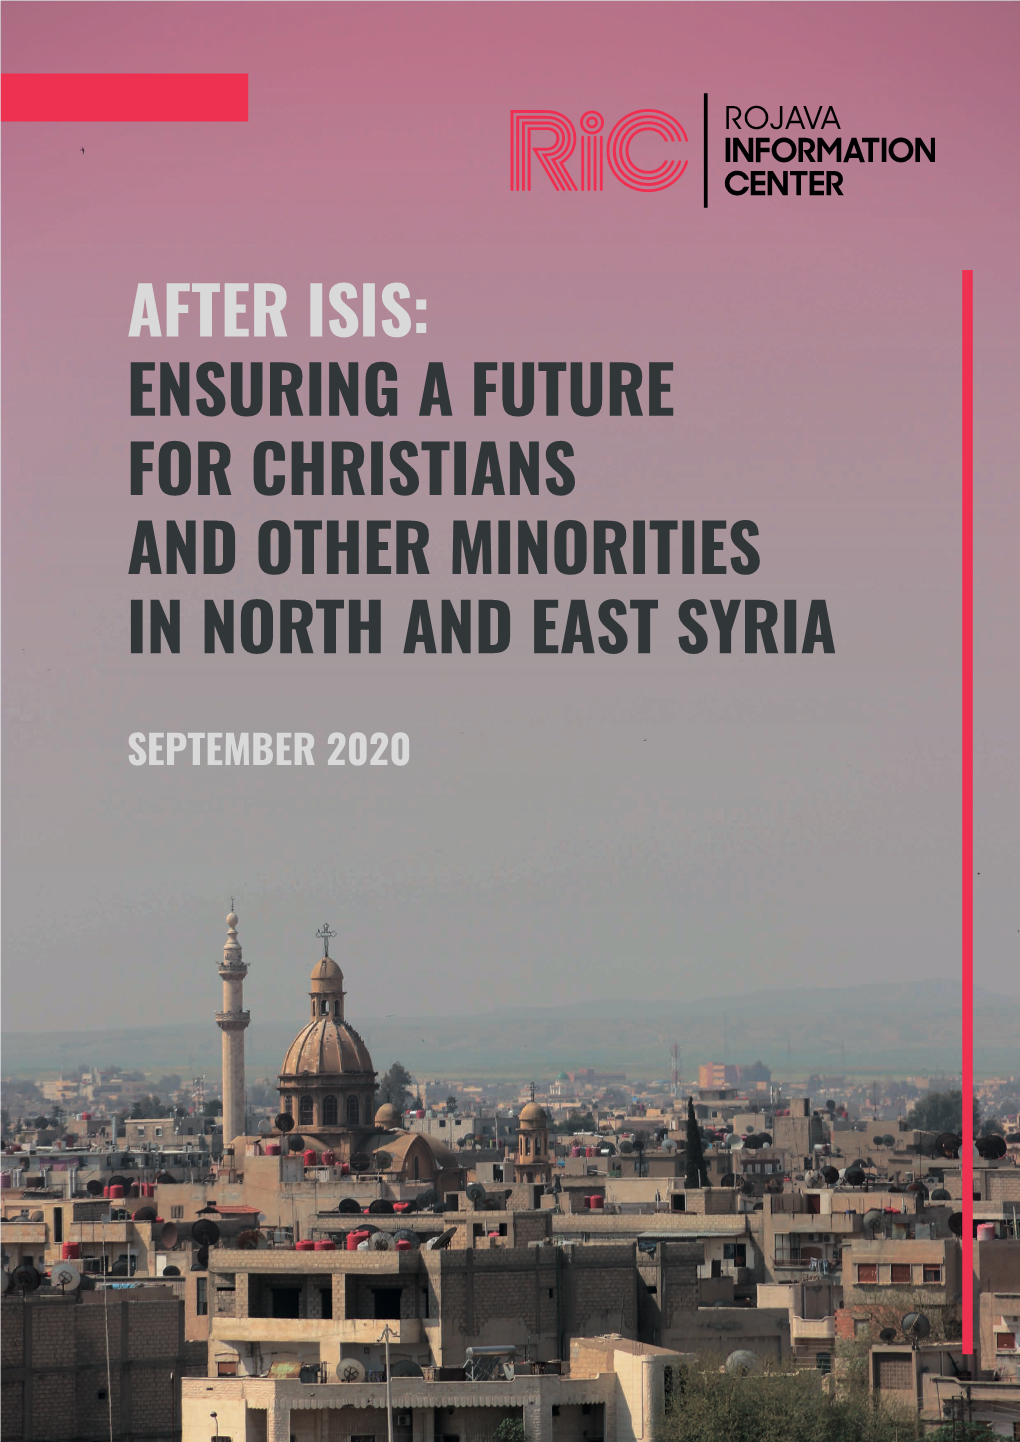 Ensuring a Future for Christians and Other Minorities in North and East Syria